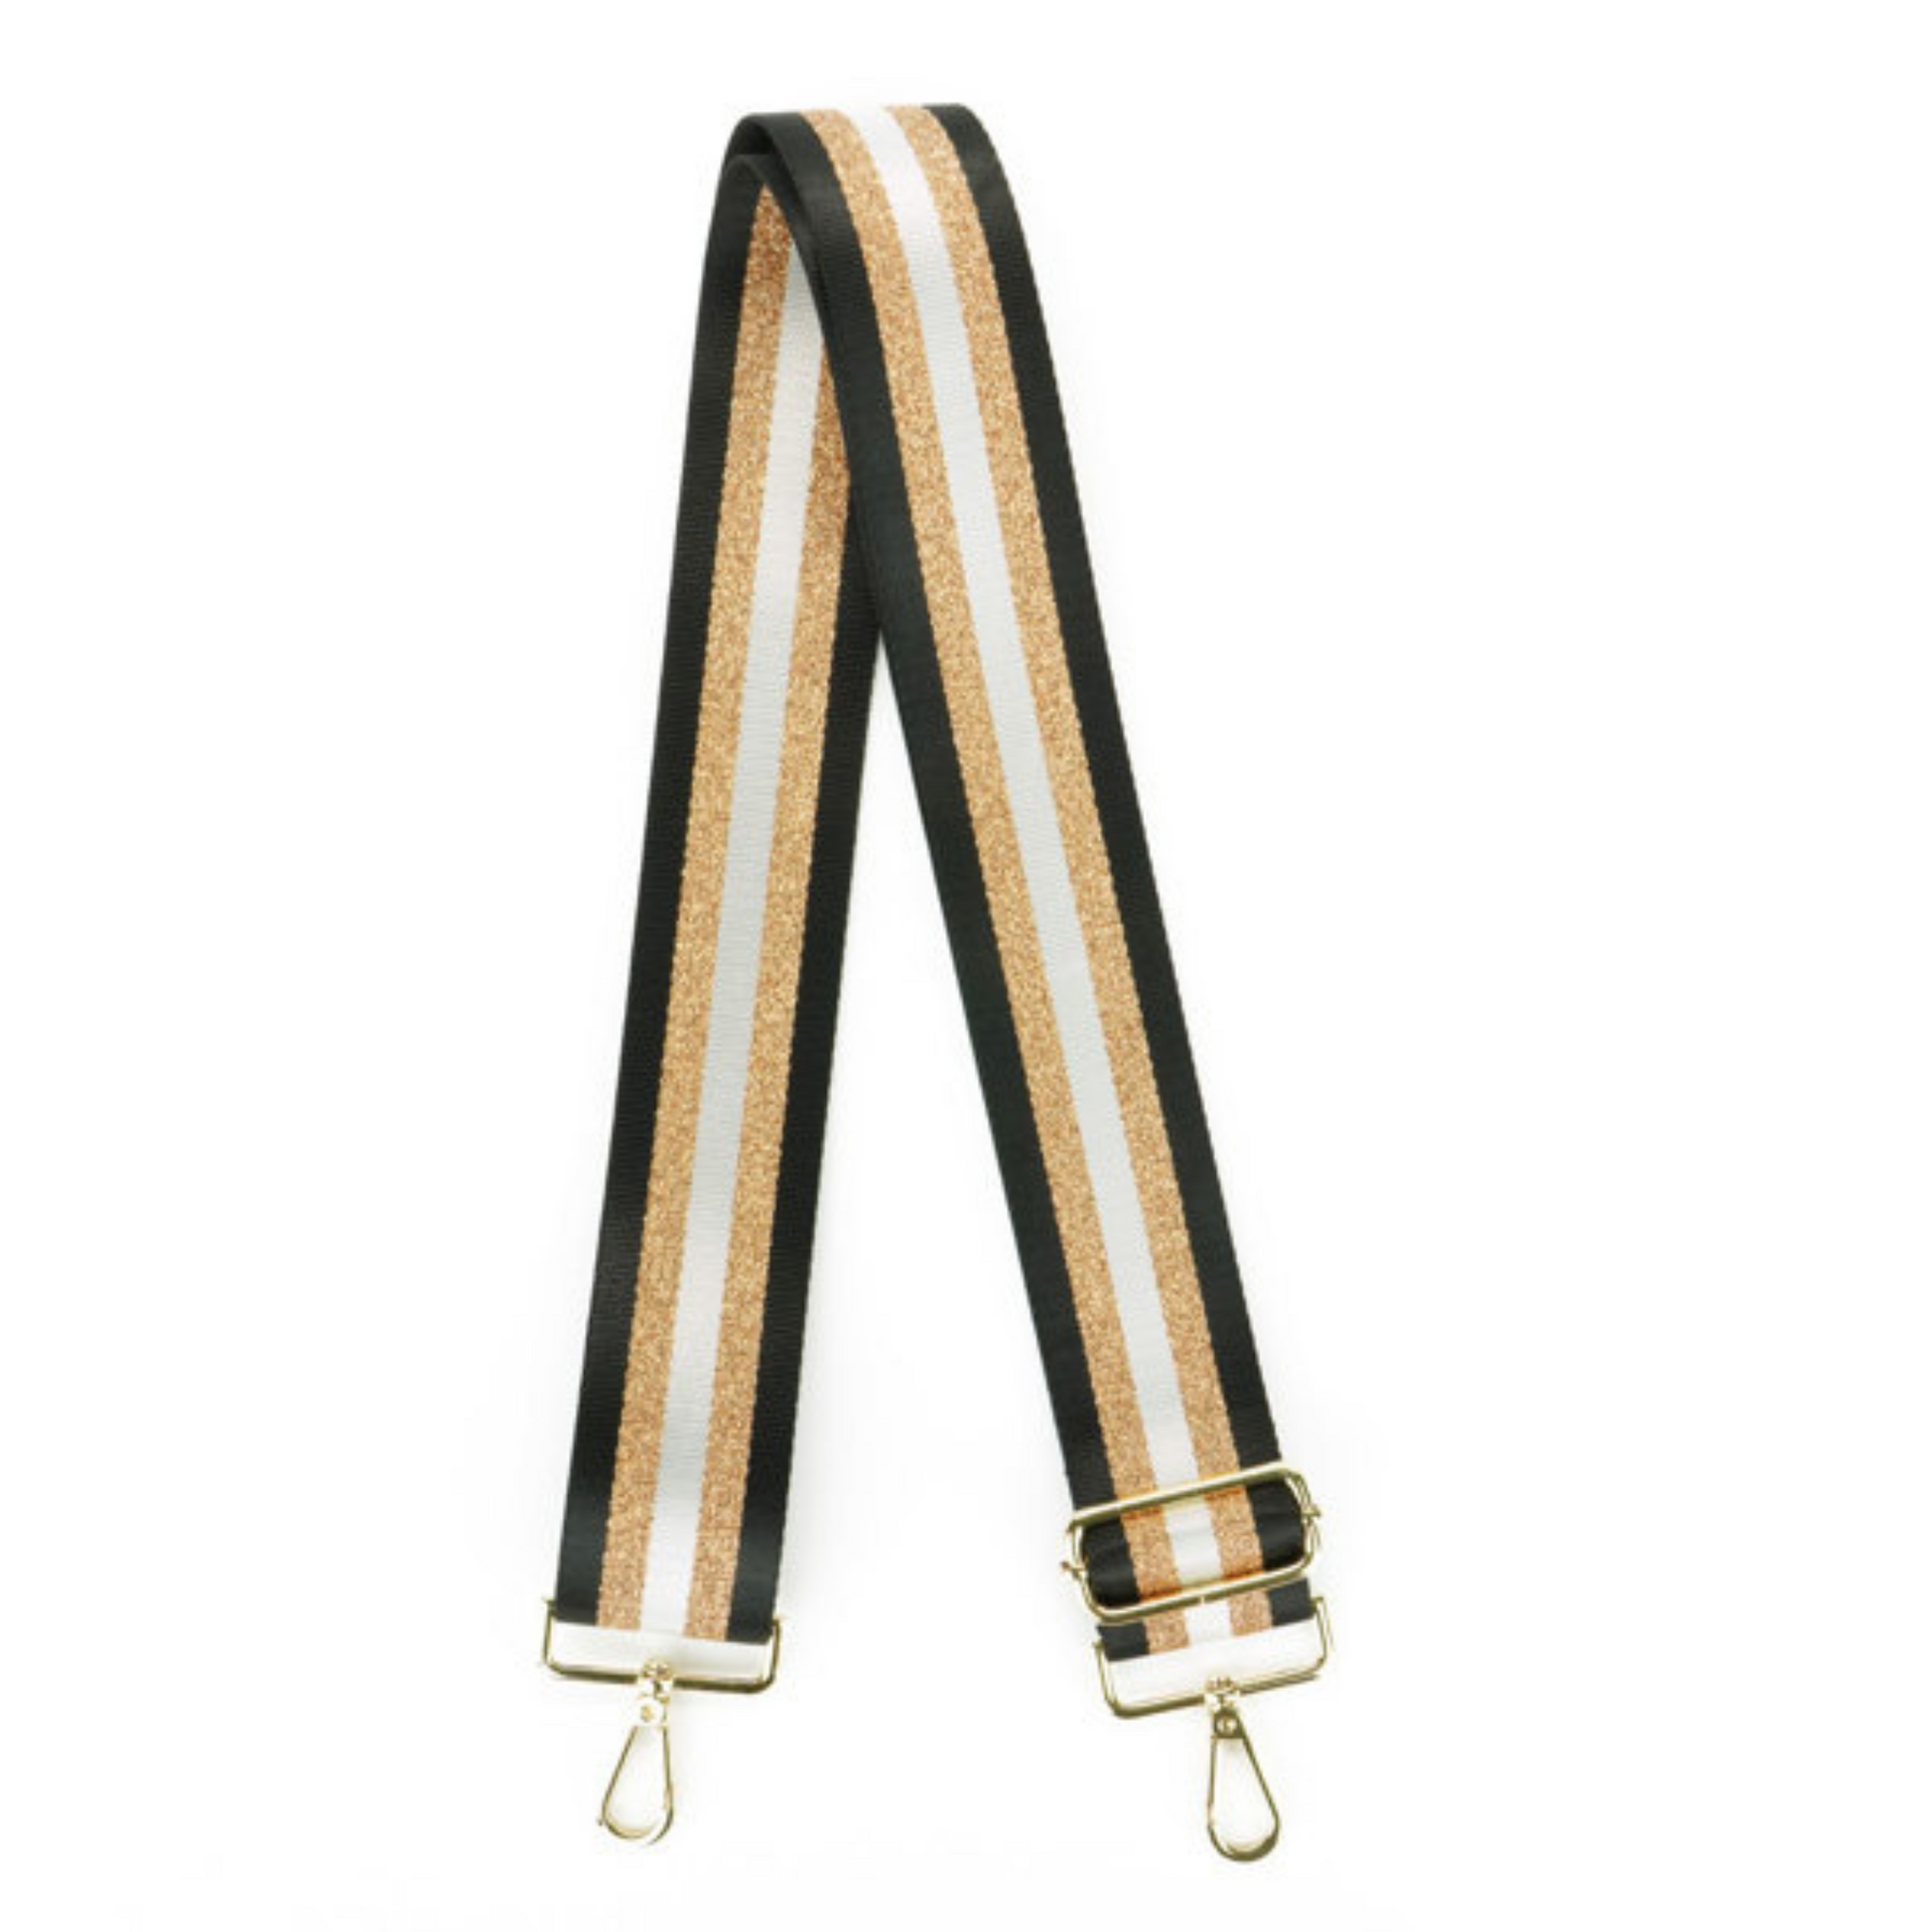 black and gold striped interchangeable purse strap from Kedzie